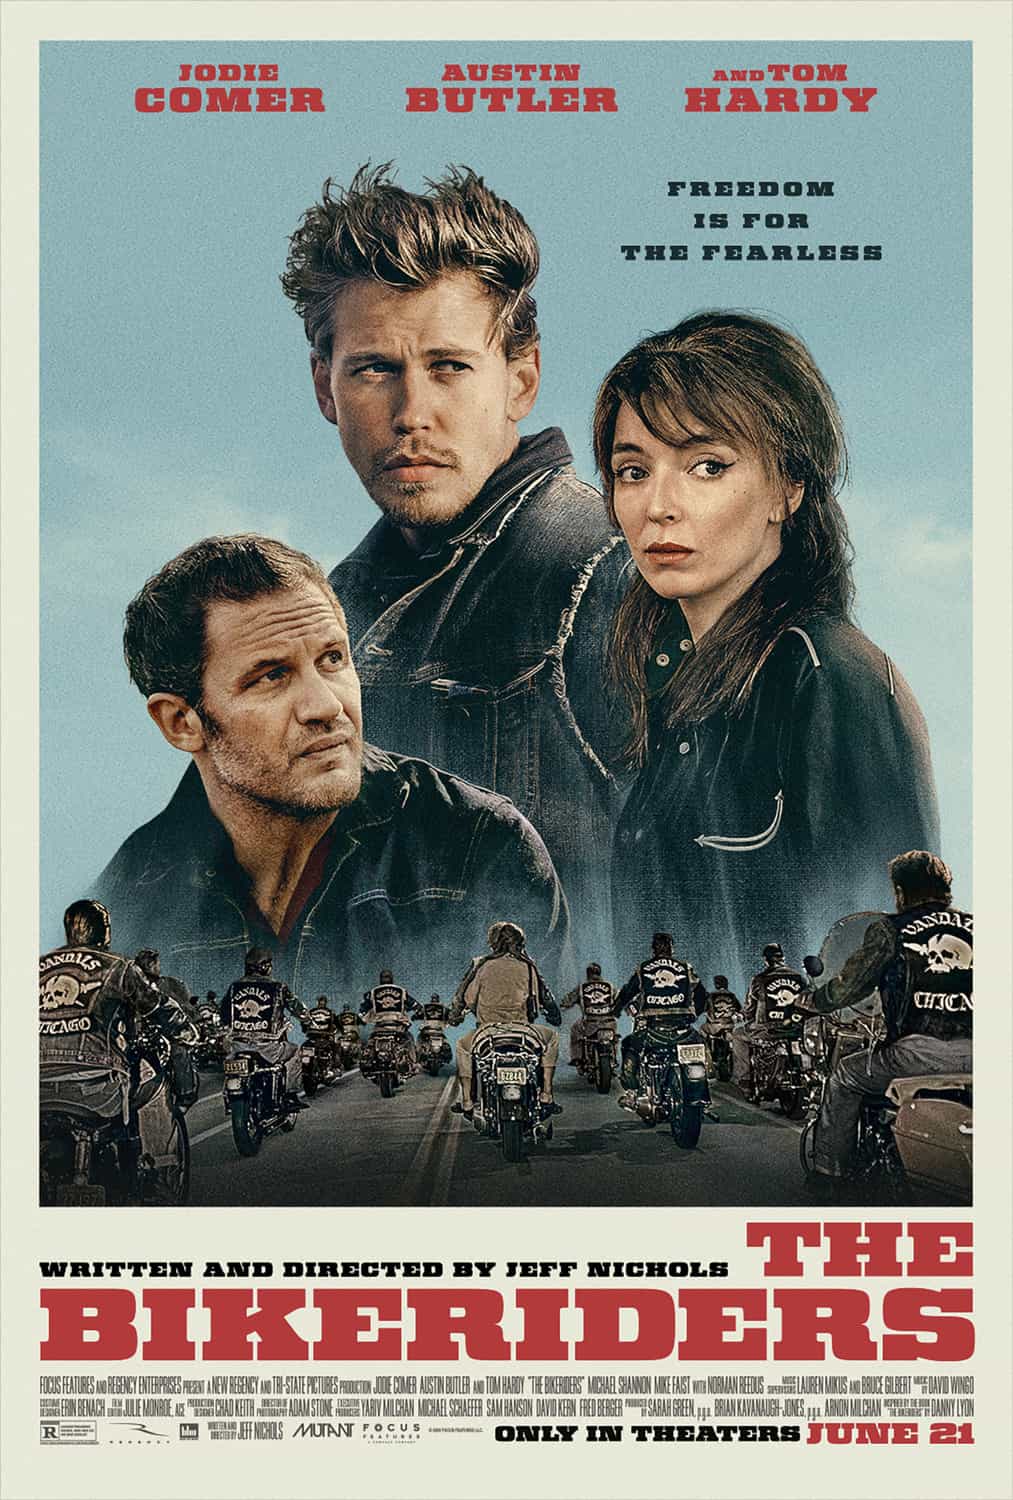 Check out the new trailer and poster for upcoming movie The Bikeriders which stars Austin Butler and Jodie Comer - movie UK release date 1st December 2023 #thebikeriders